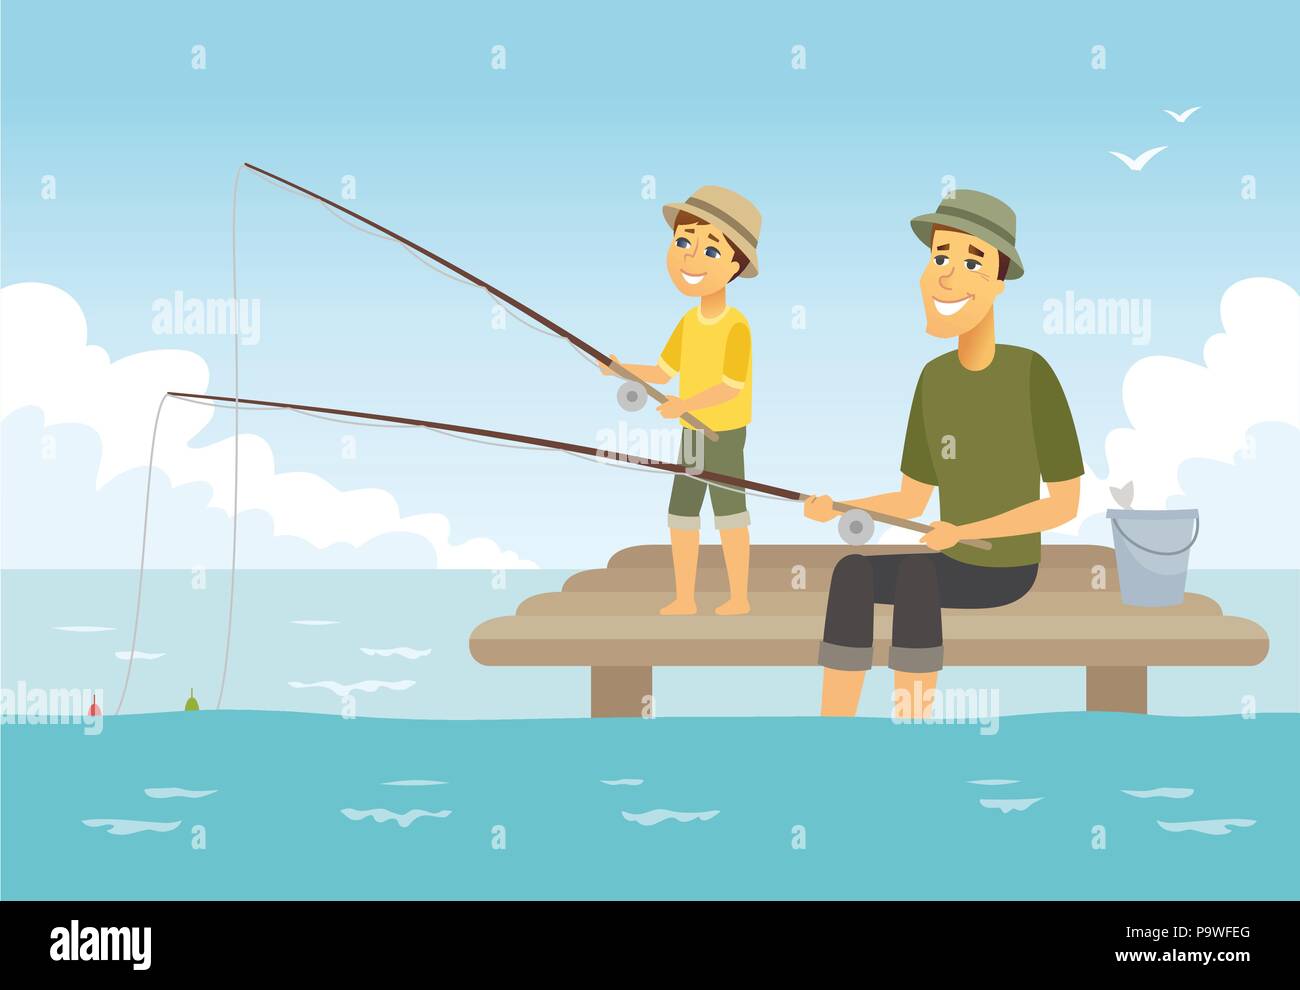 Father and son fishing - cartoon people characters illustration